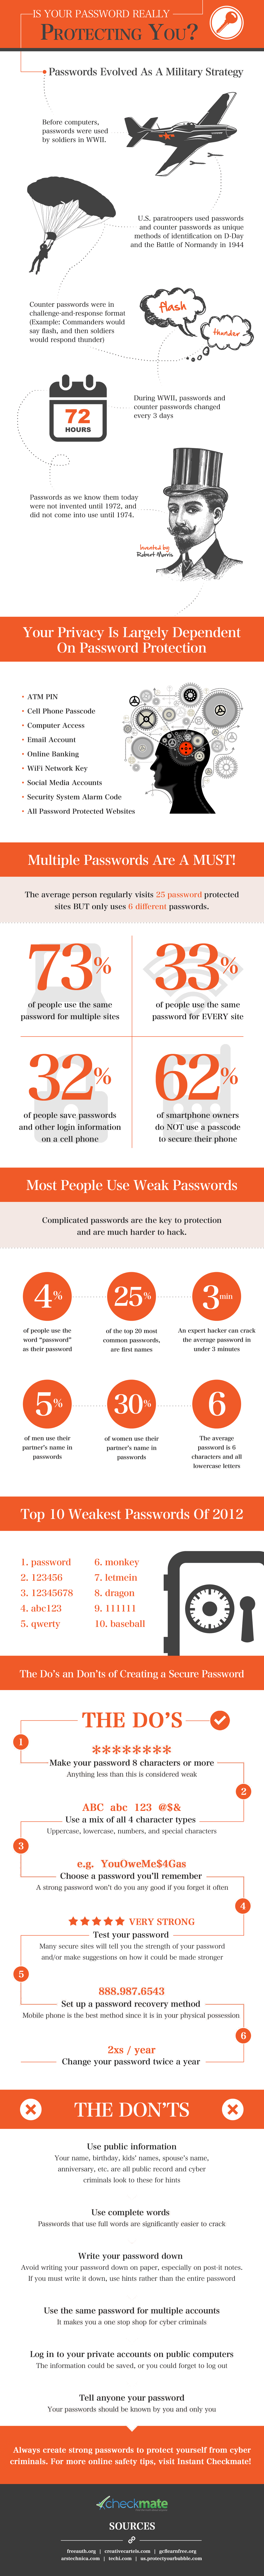 Is Your Password Really Protecting You? Infographic